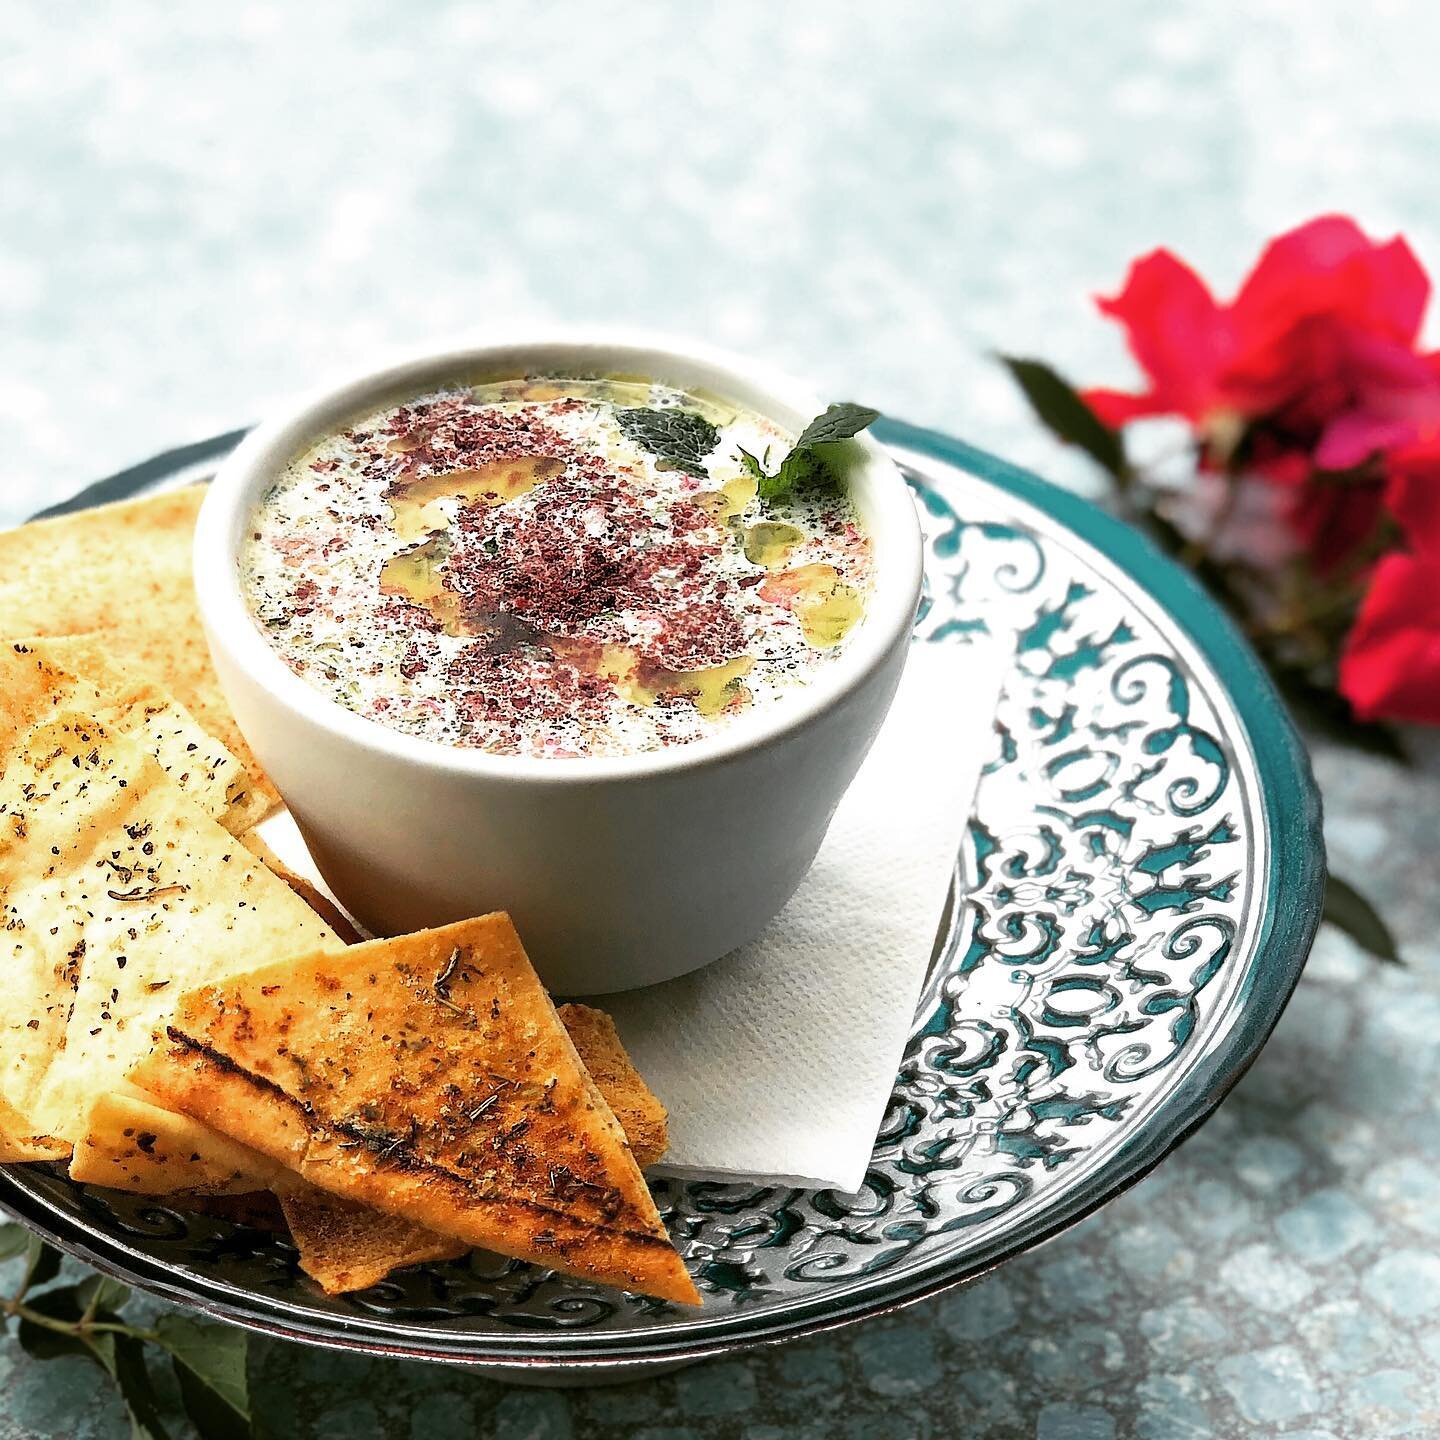 Cool down with our Chilled Persian Soup.  Made with low fat yogurt, walnuts, dried rose petals, golden raisins, chives, cucumber, fresh mint, fresh dill, sumac, and pepper. 😋yum! Cold, summer soup.

#baladimediterraneancafe #baladi #afewsimpleingred